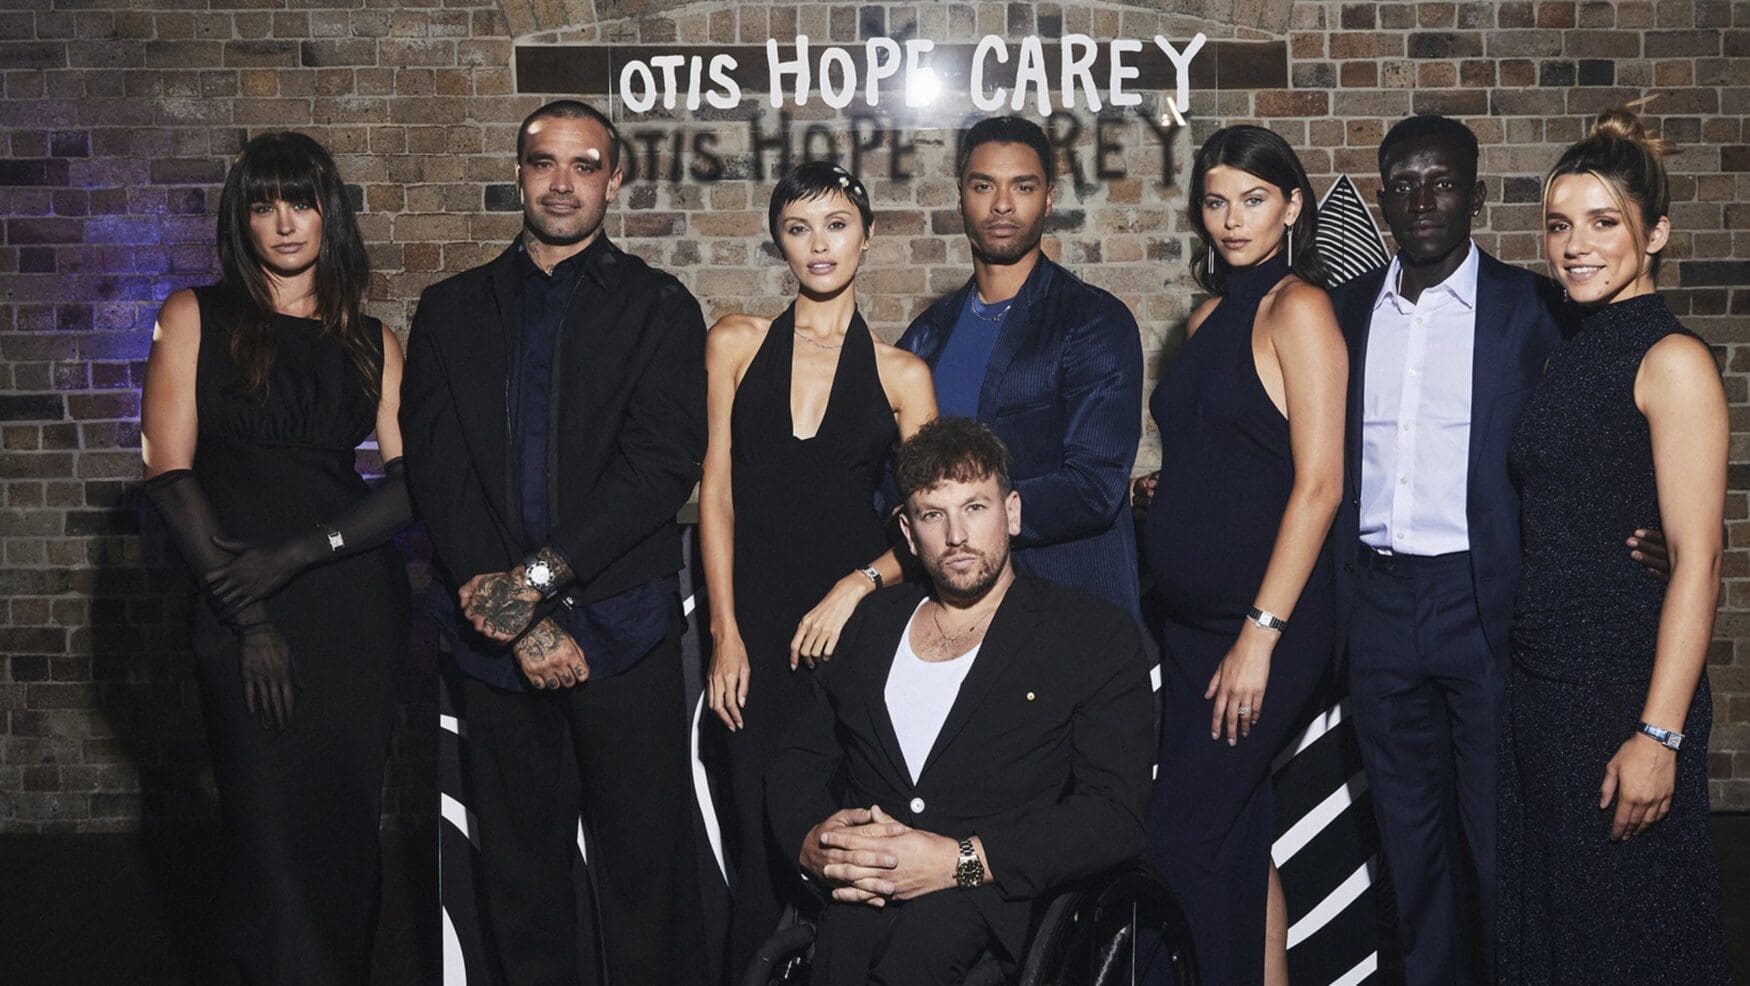 Longines celebrated the Mini DolceVita & their Otis Hope Carey collaboration with a star-studded Sydney party